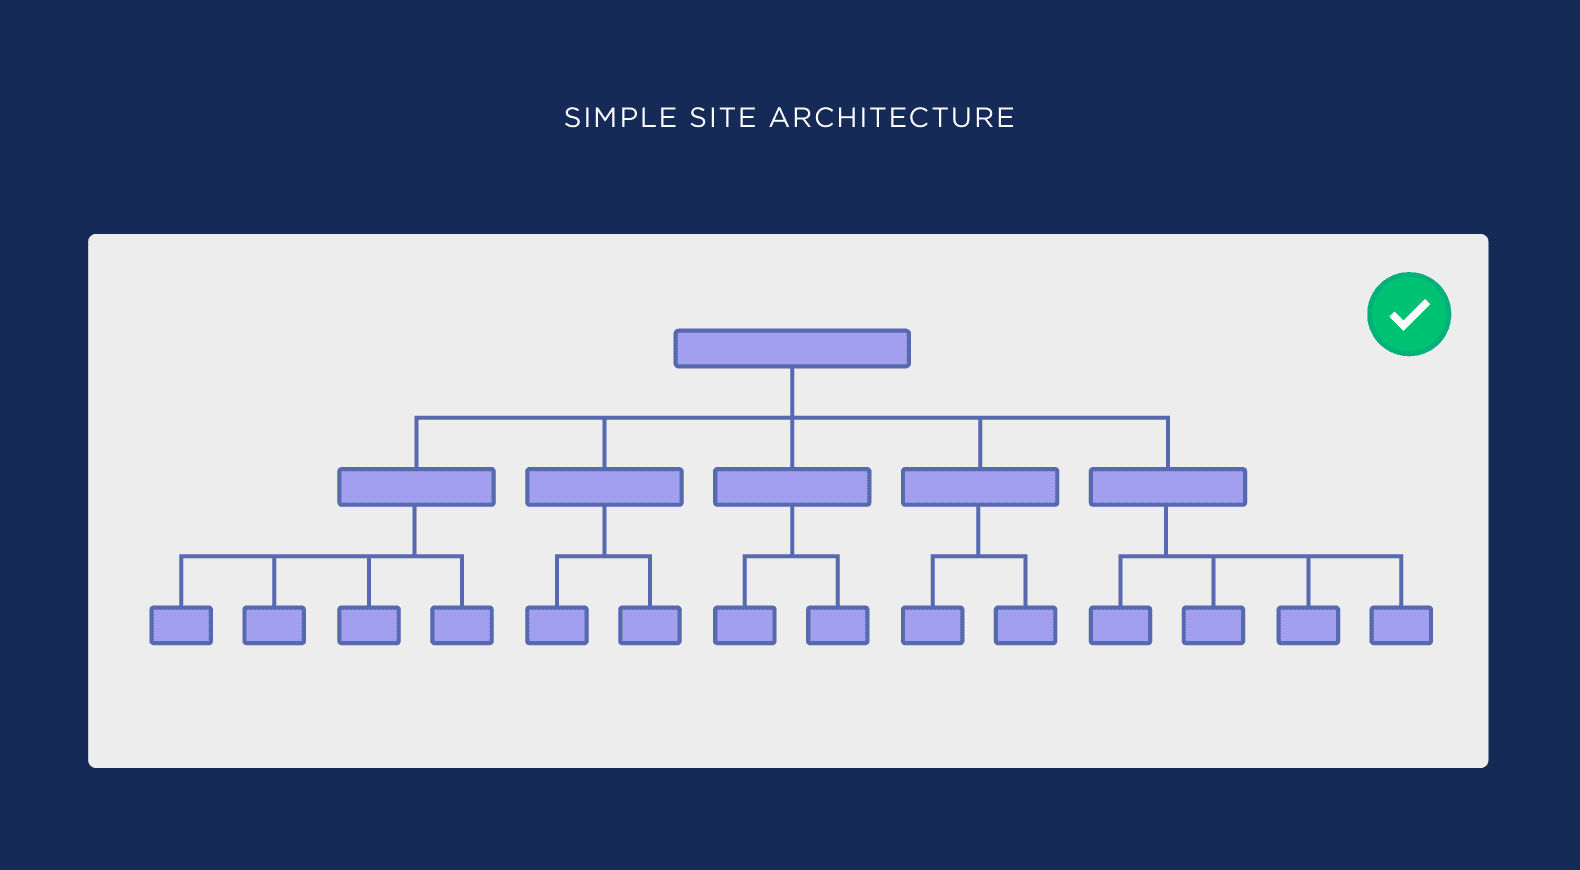 An example of a well-organized architecture 